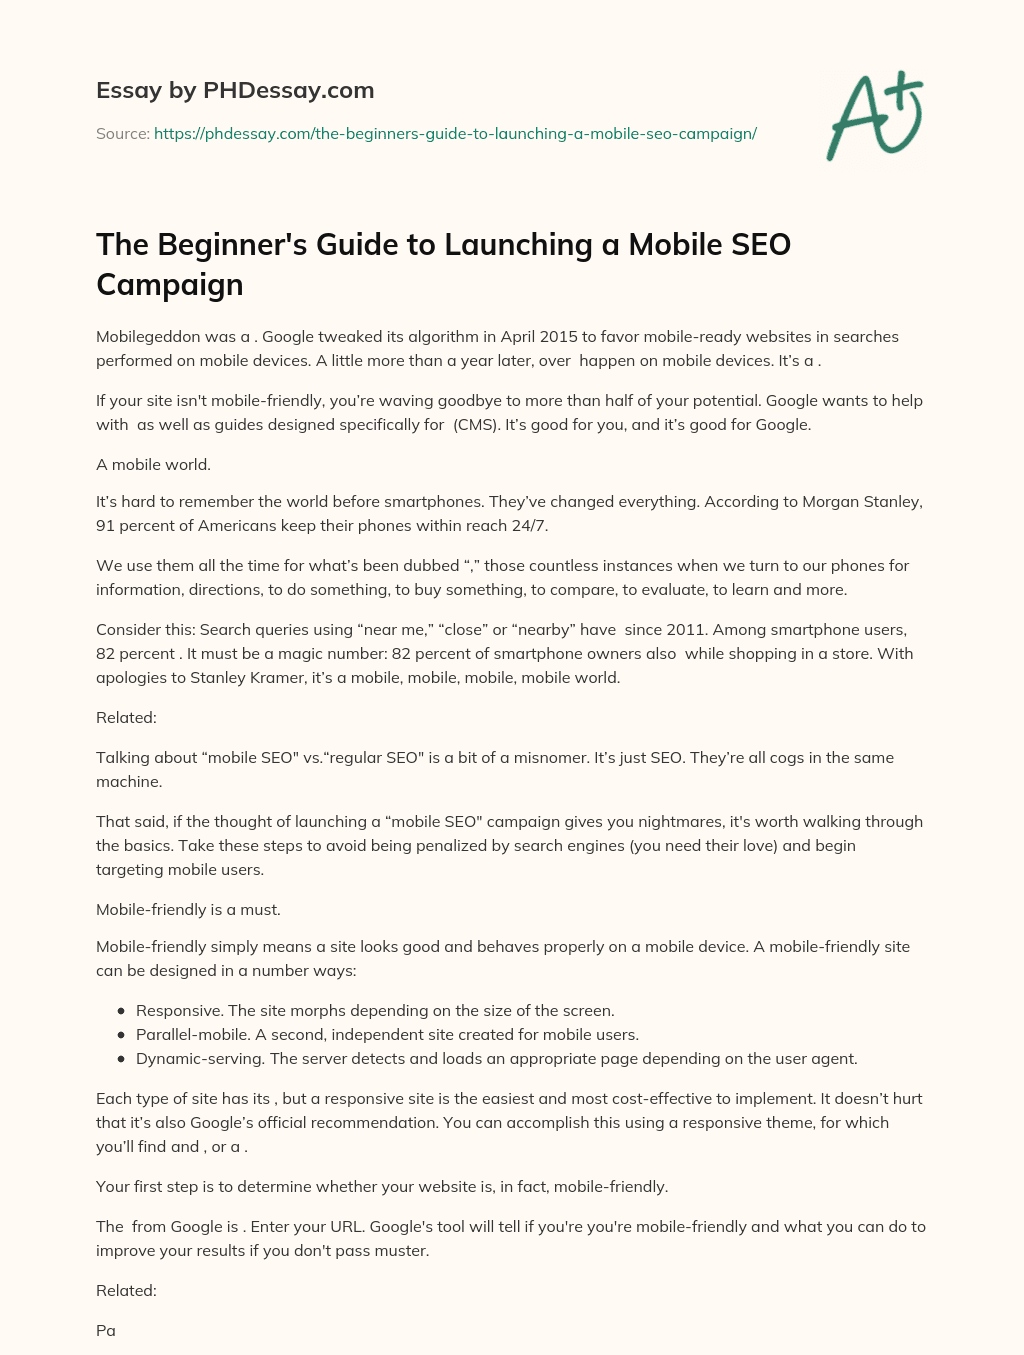 The Beginner’s Guide to Launching a Mobile SEO Campaign essay